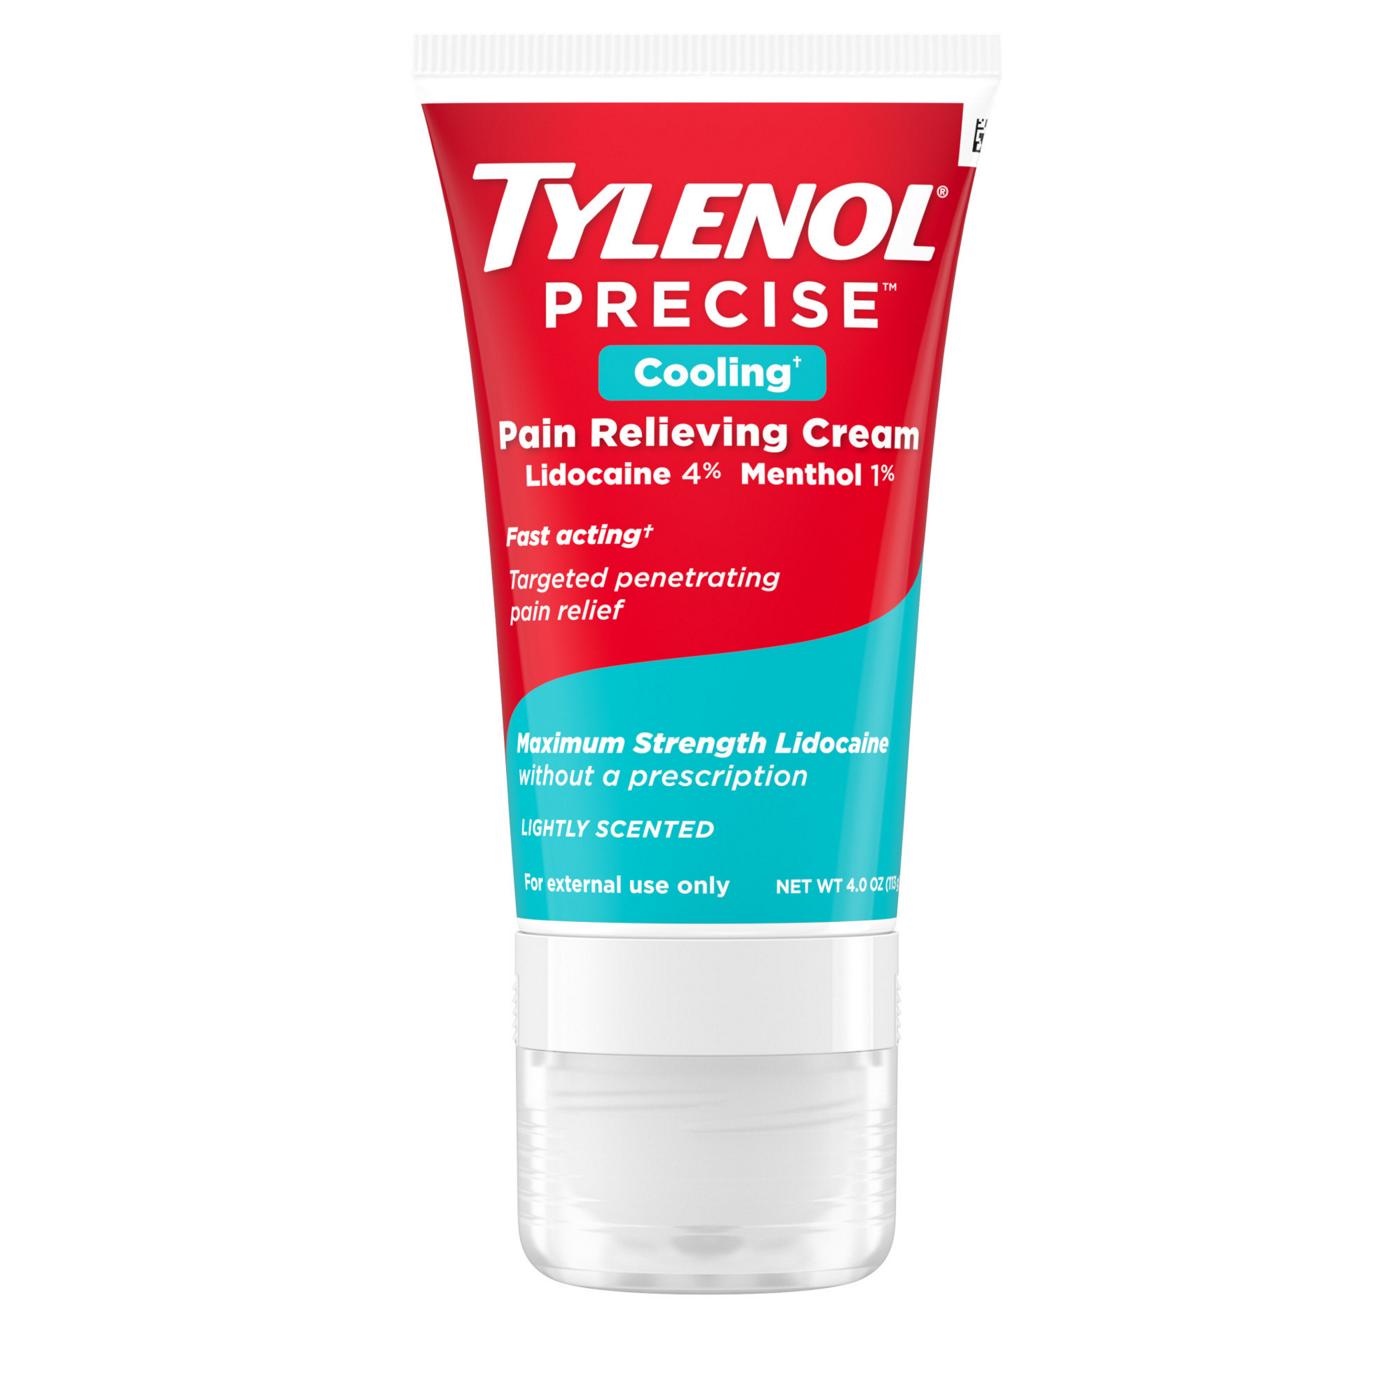 Tylenol Precise Cooling Pain Relieving Cream; image 6 of 6